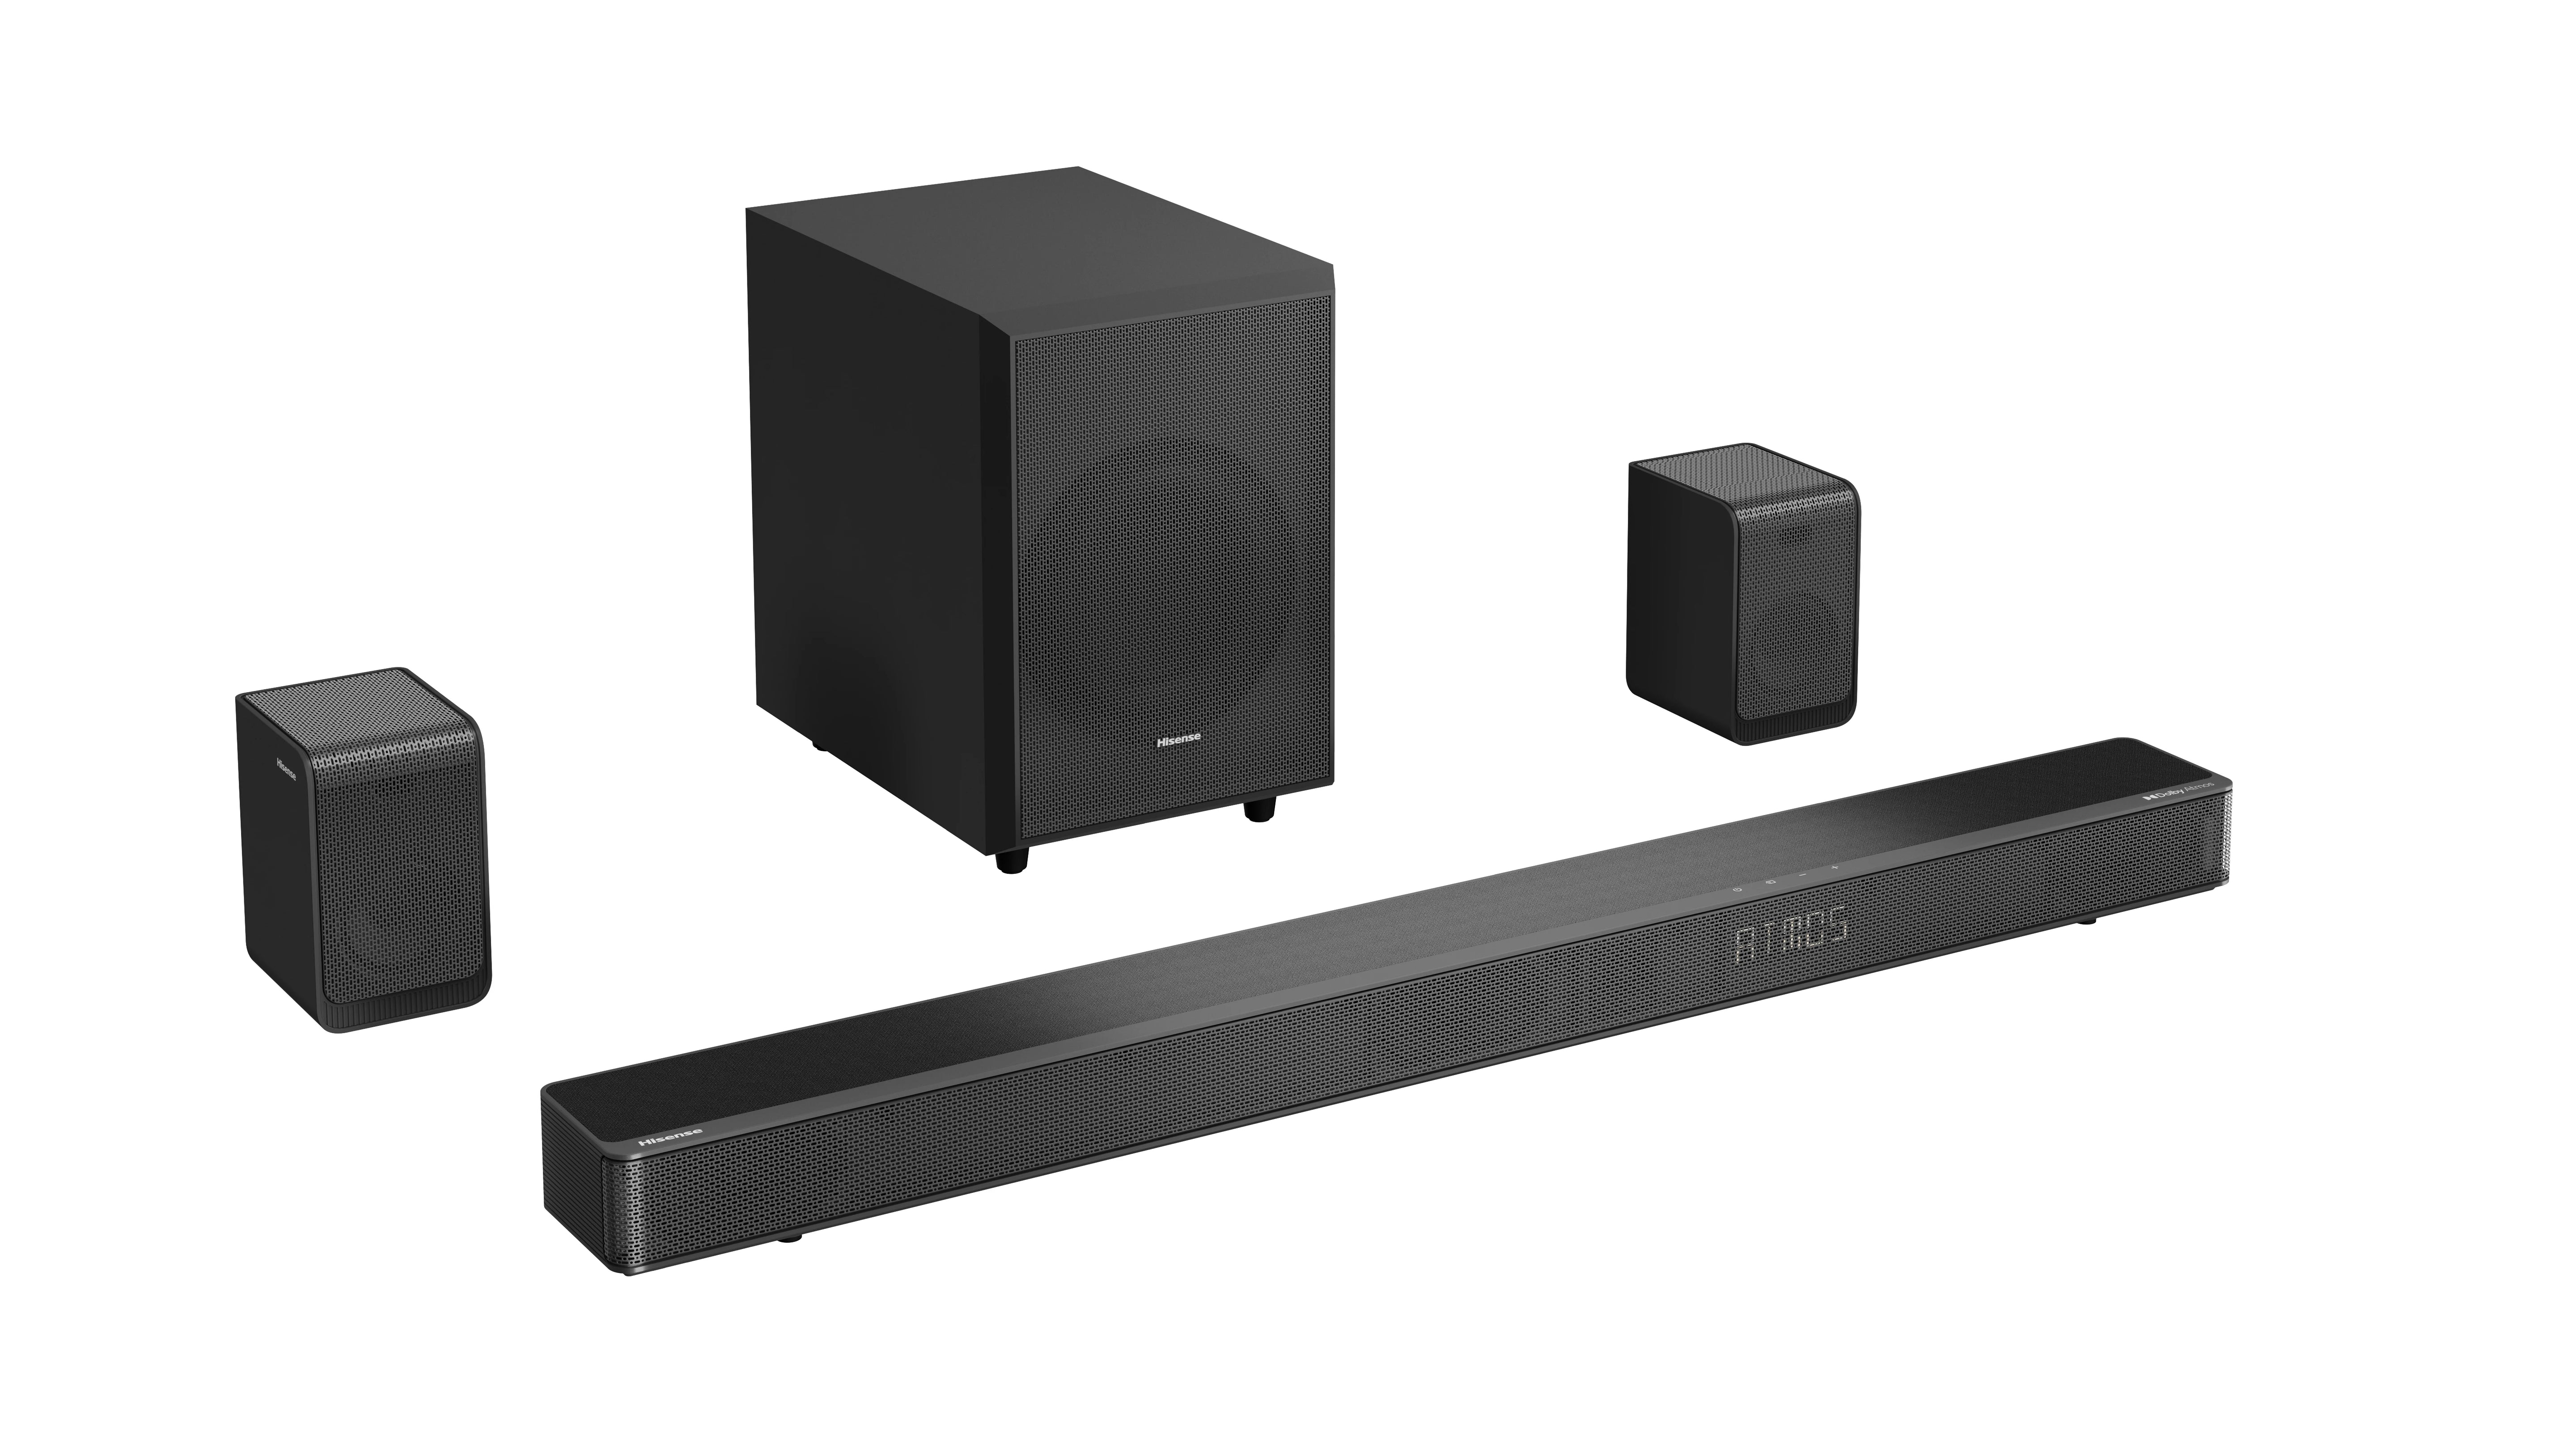 Hisense AX5125H 5.1.2 Dolby ATMOS Soundbar with Wireless Rear Speakers & Wireless Subwoofer